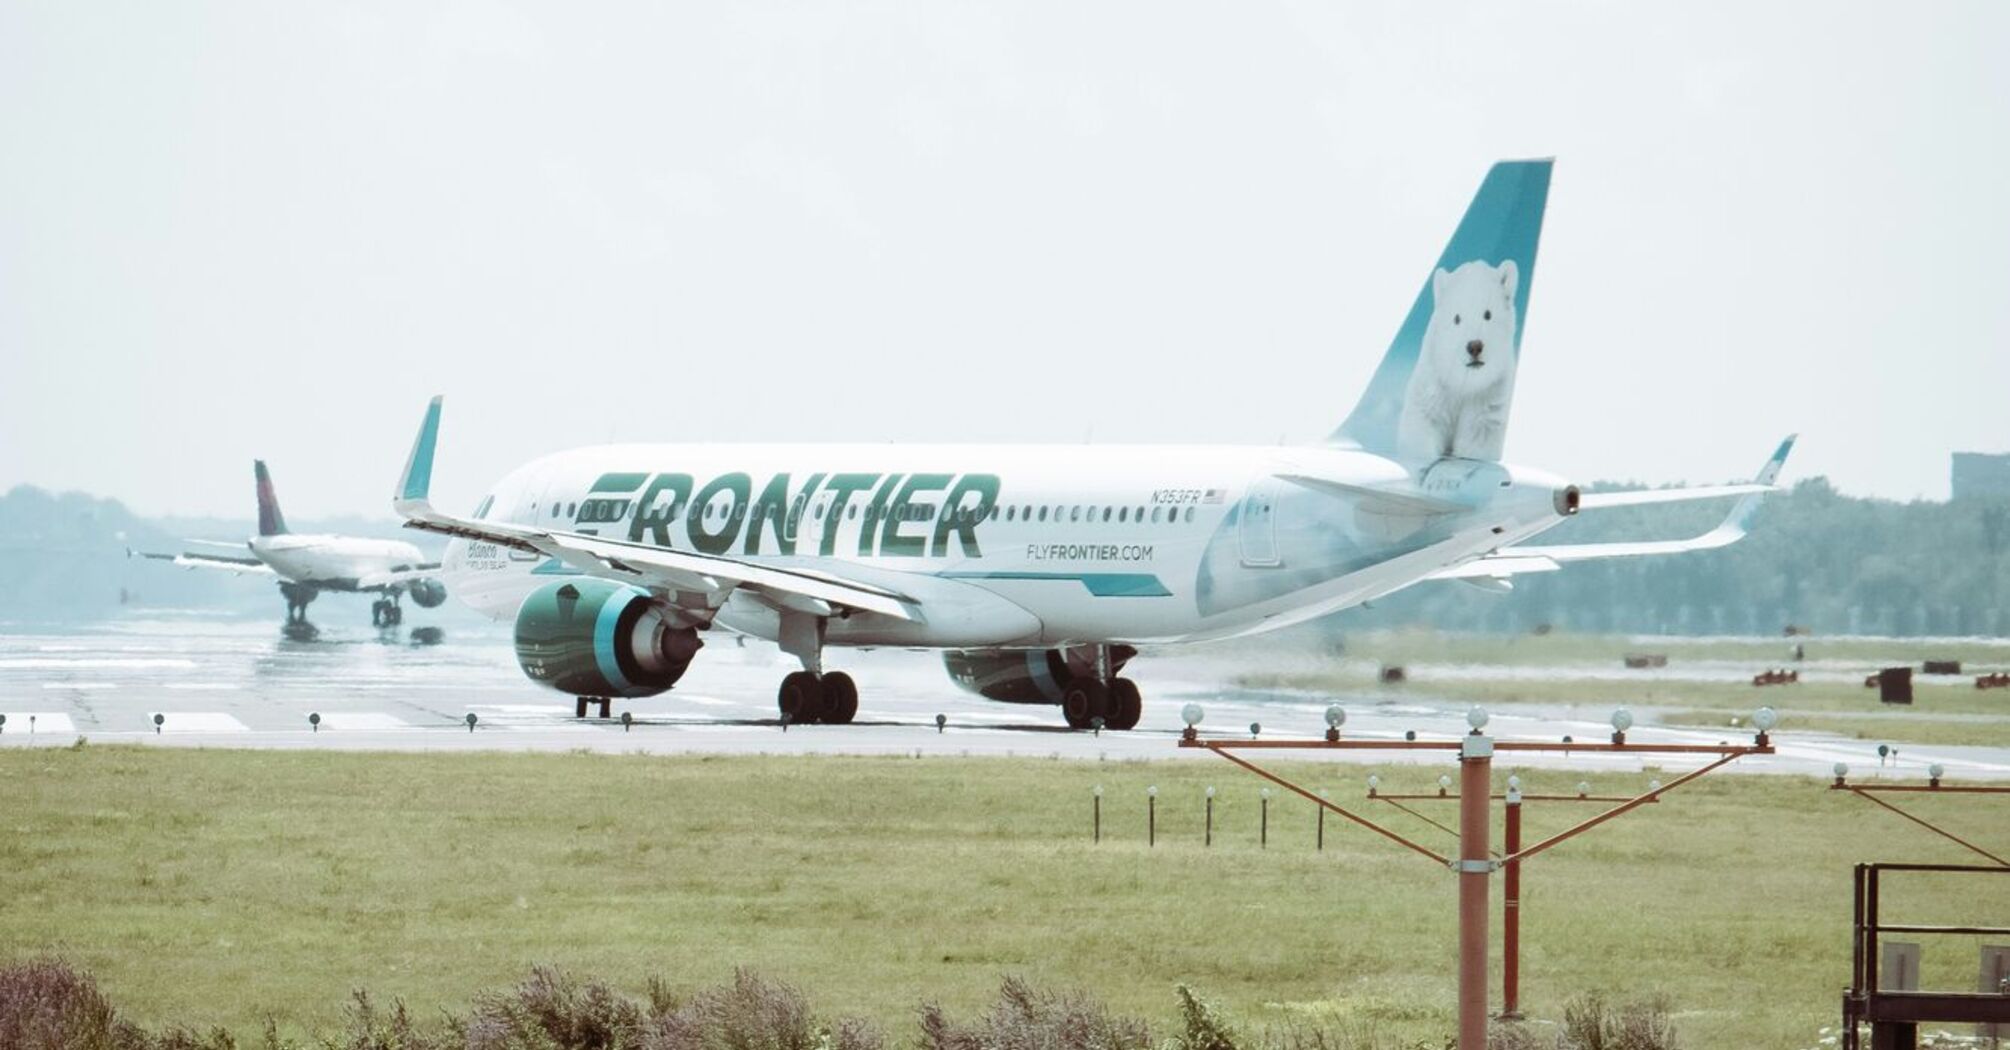 The woman from Philadelphia who stripped on a Frontier Airlines flight 2 months ago has been arrested and charged